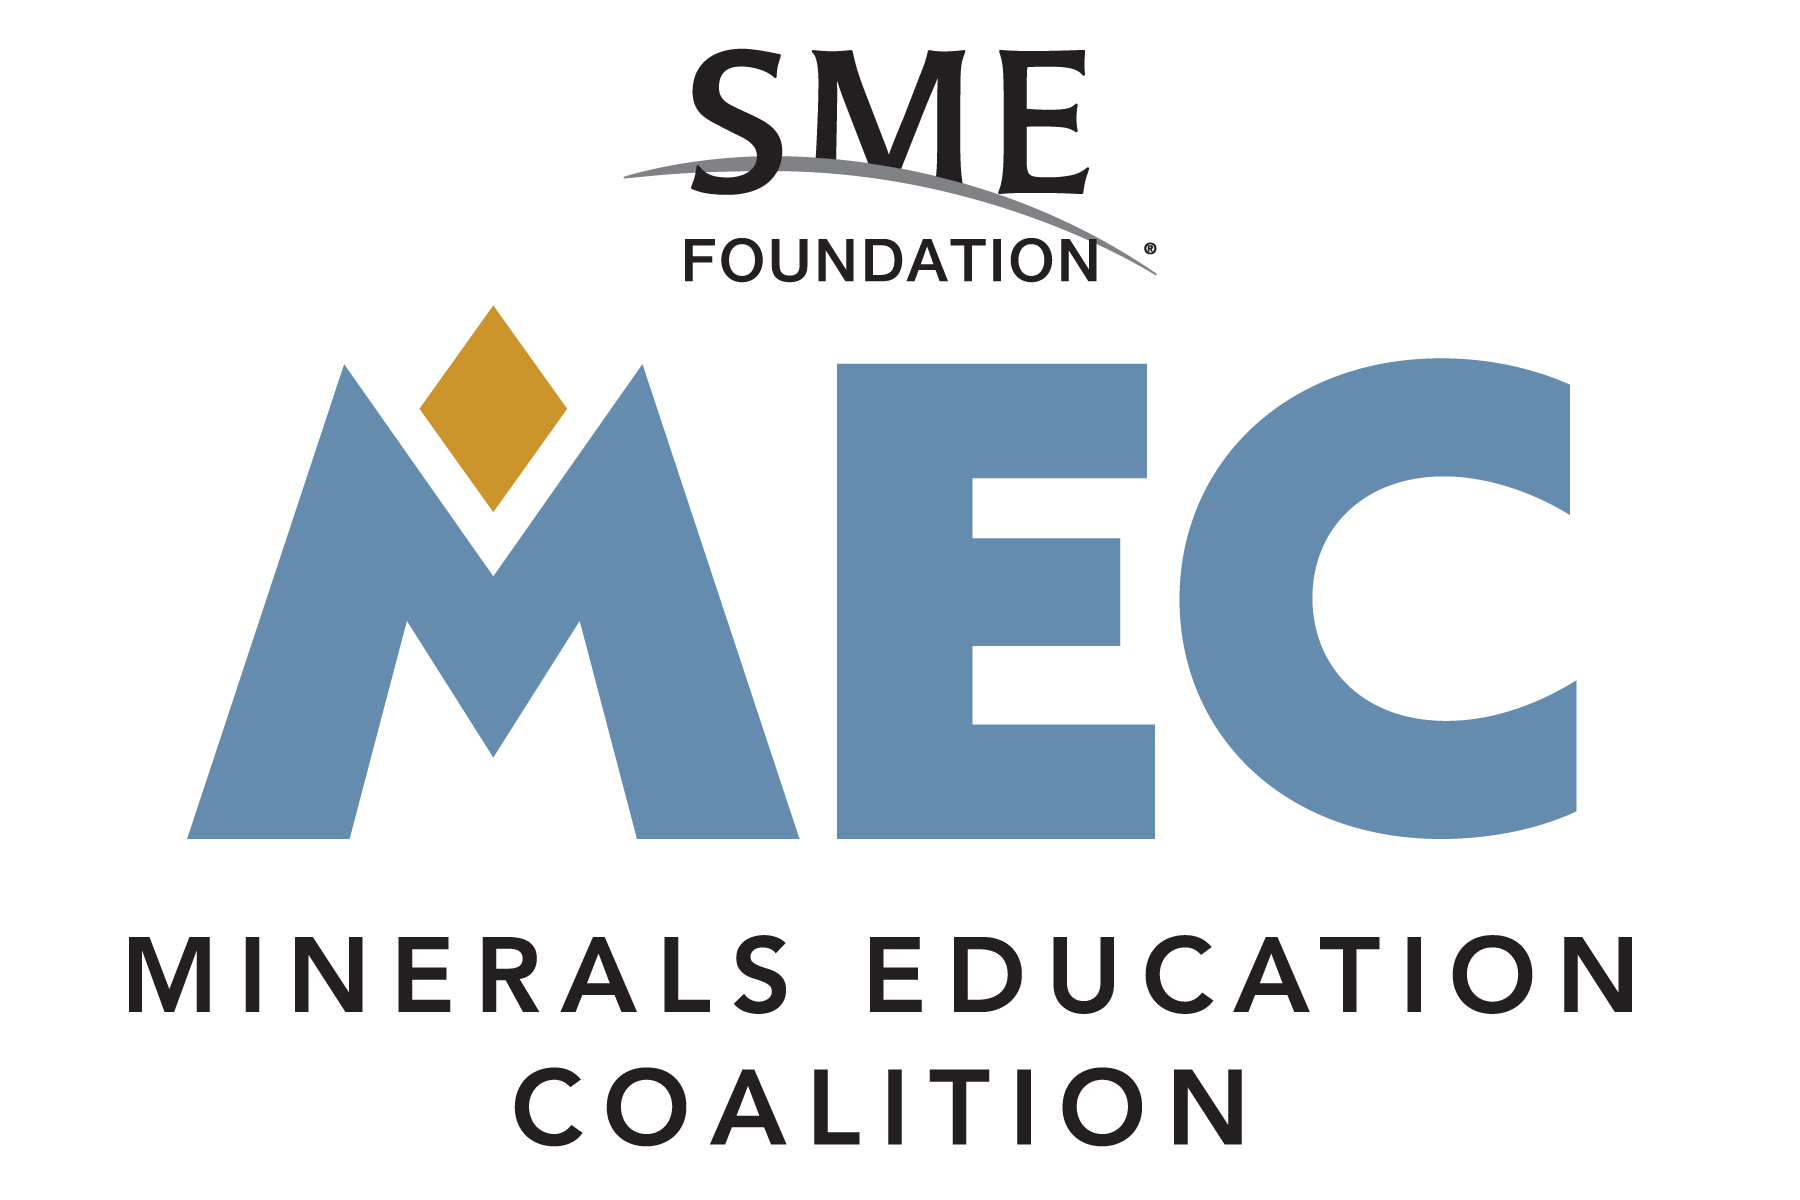 Minerals Education Coalition (A Division of the Society for Mining, Metallurgy, & Exploration (SME)